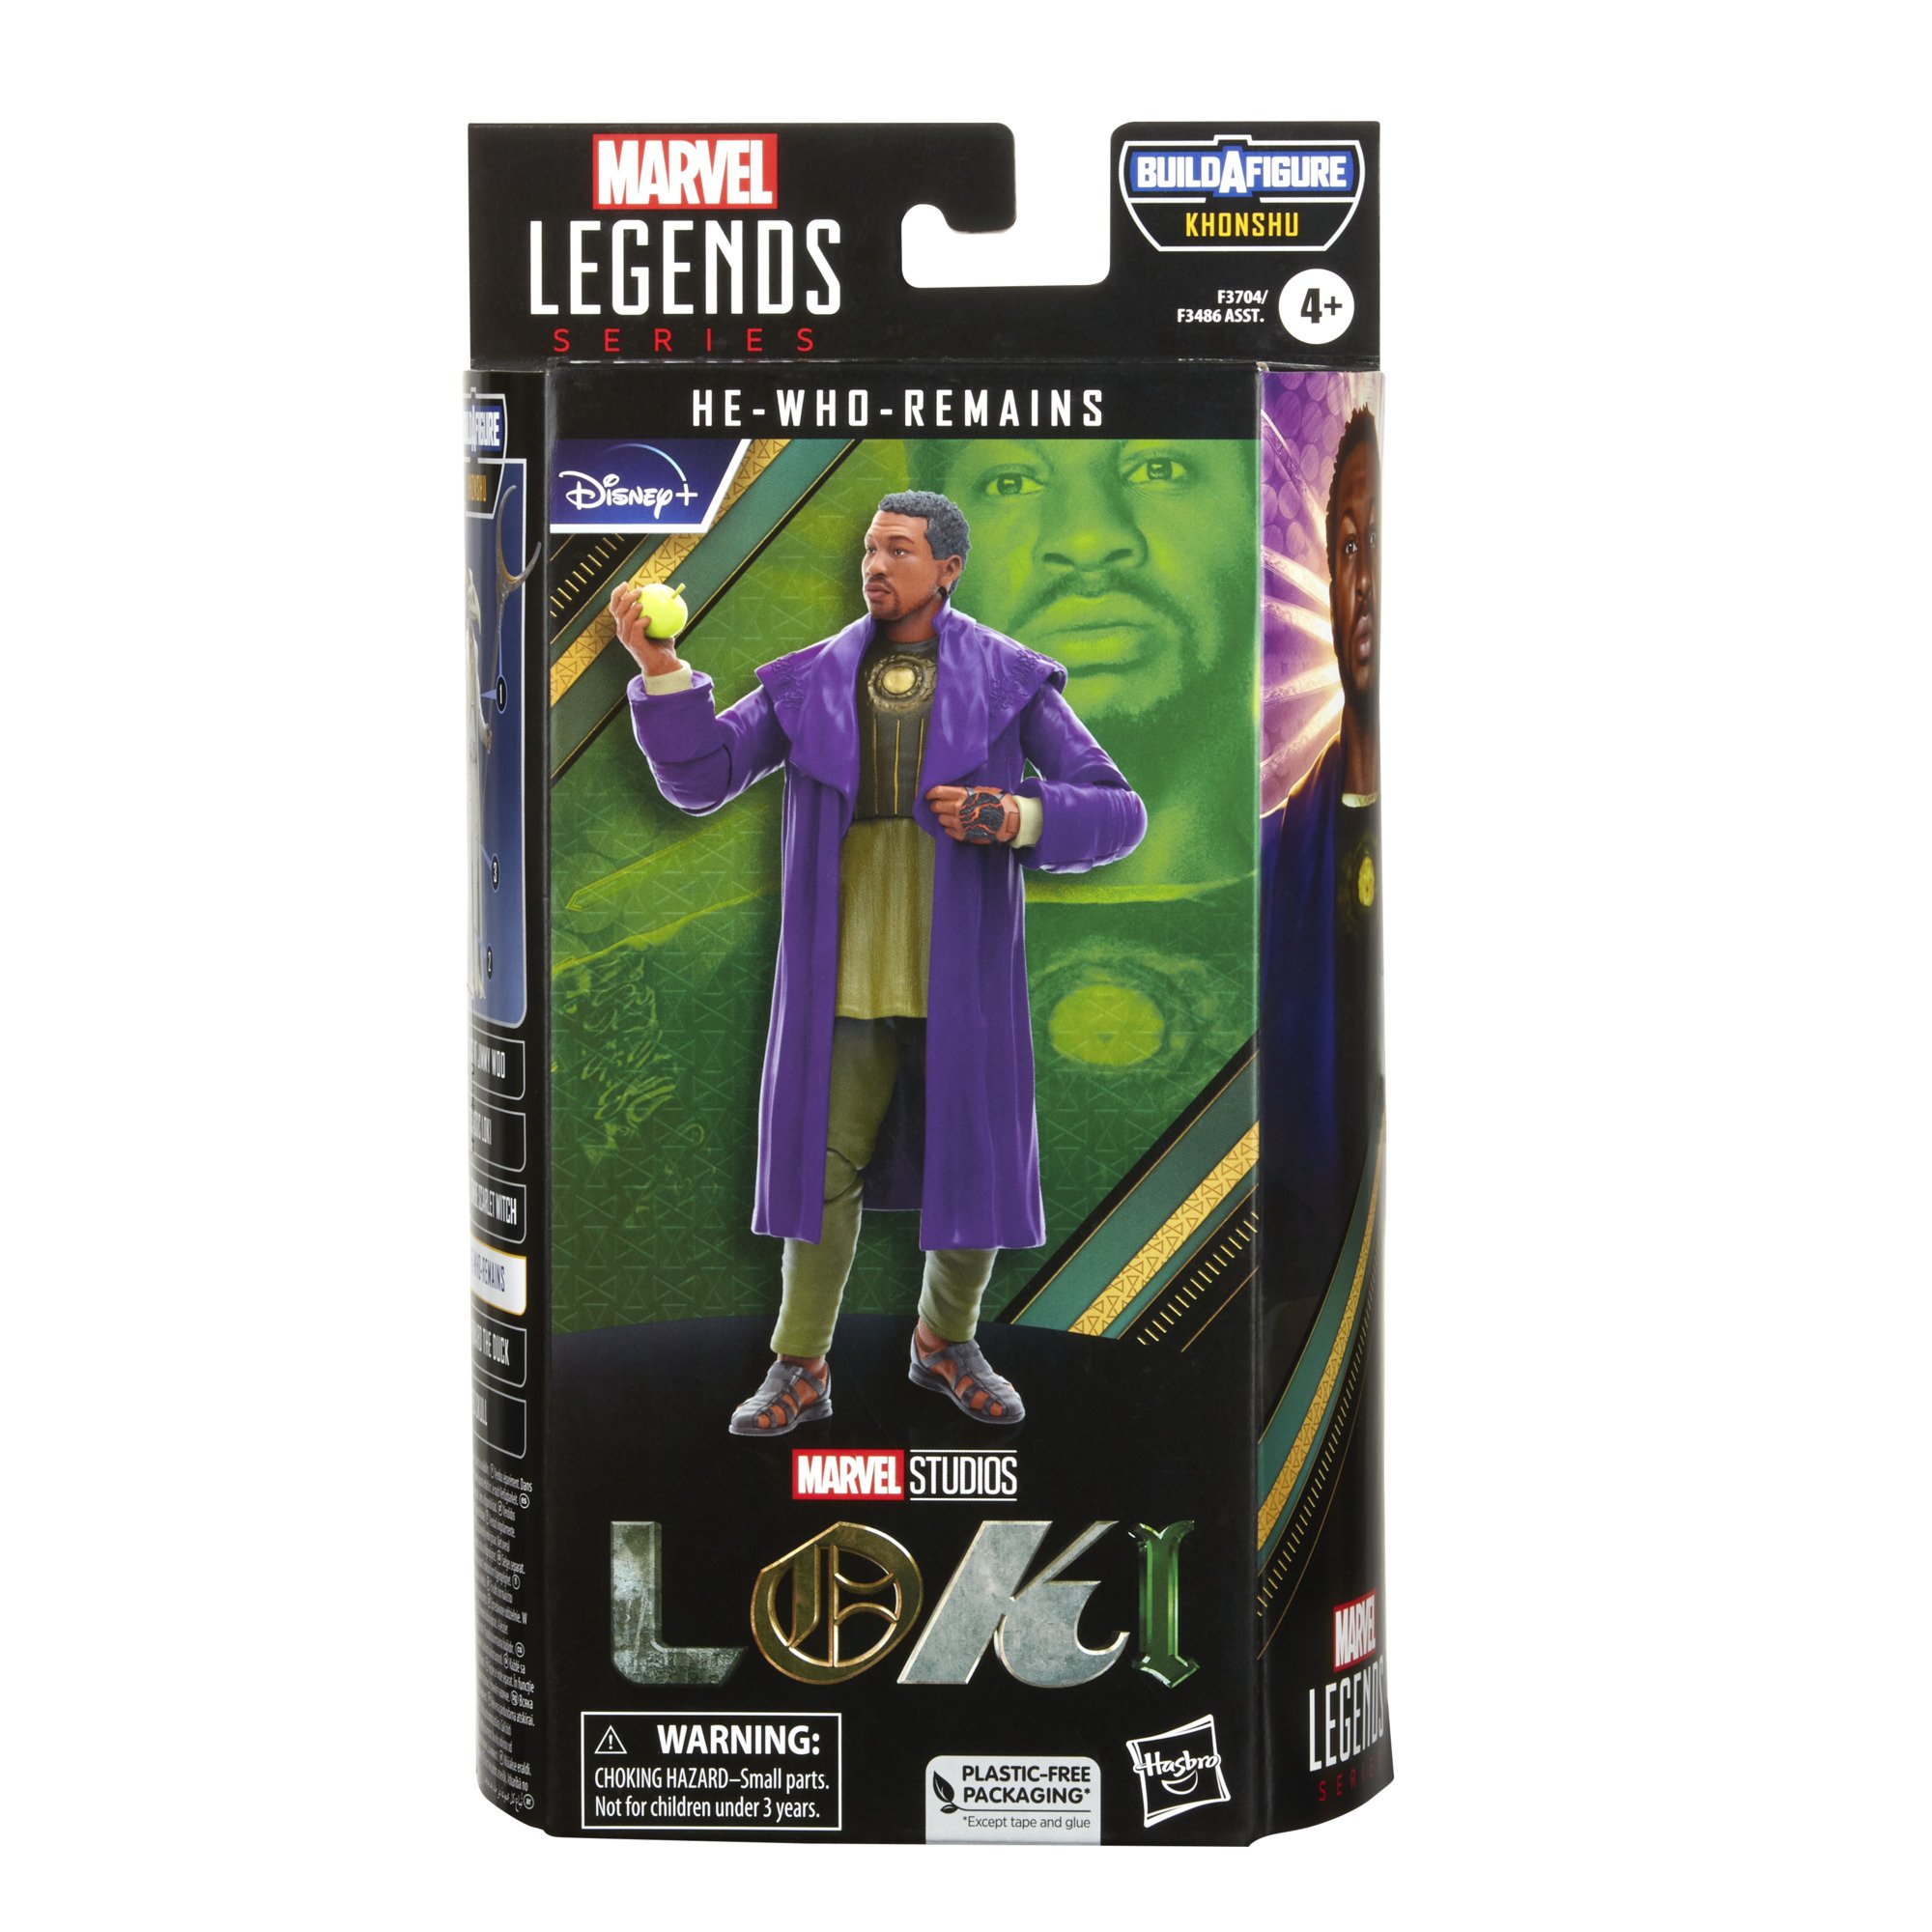 HASBRO MARVEL LEGENDS SERIES HE-WHO-REMAINS 6.jpg